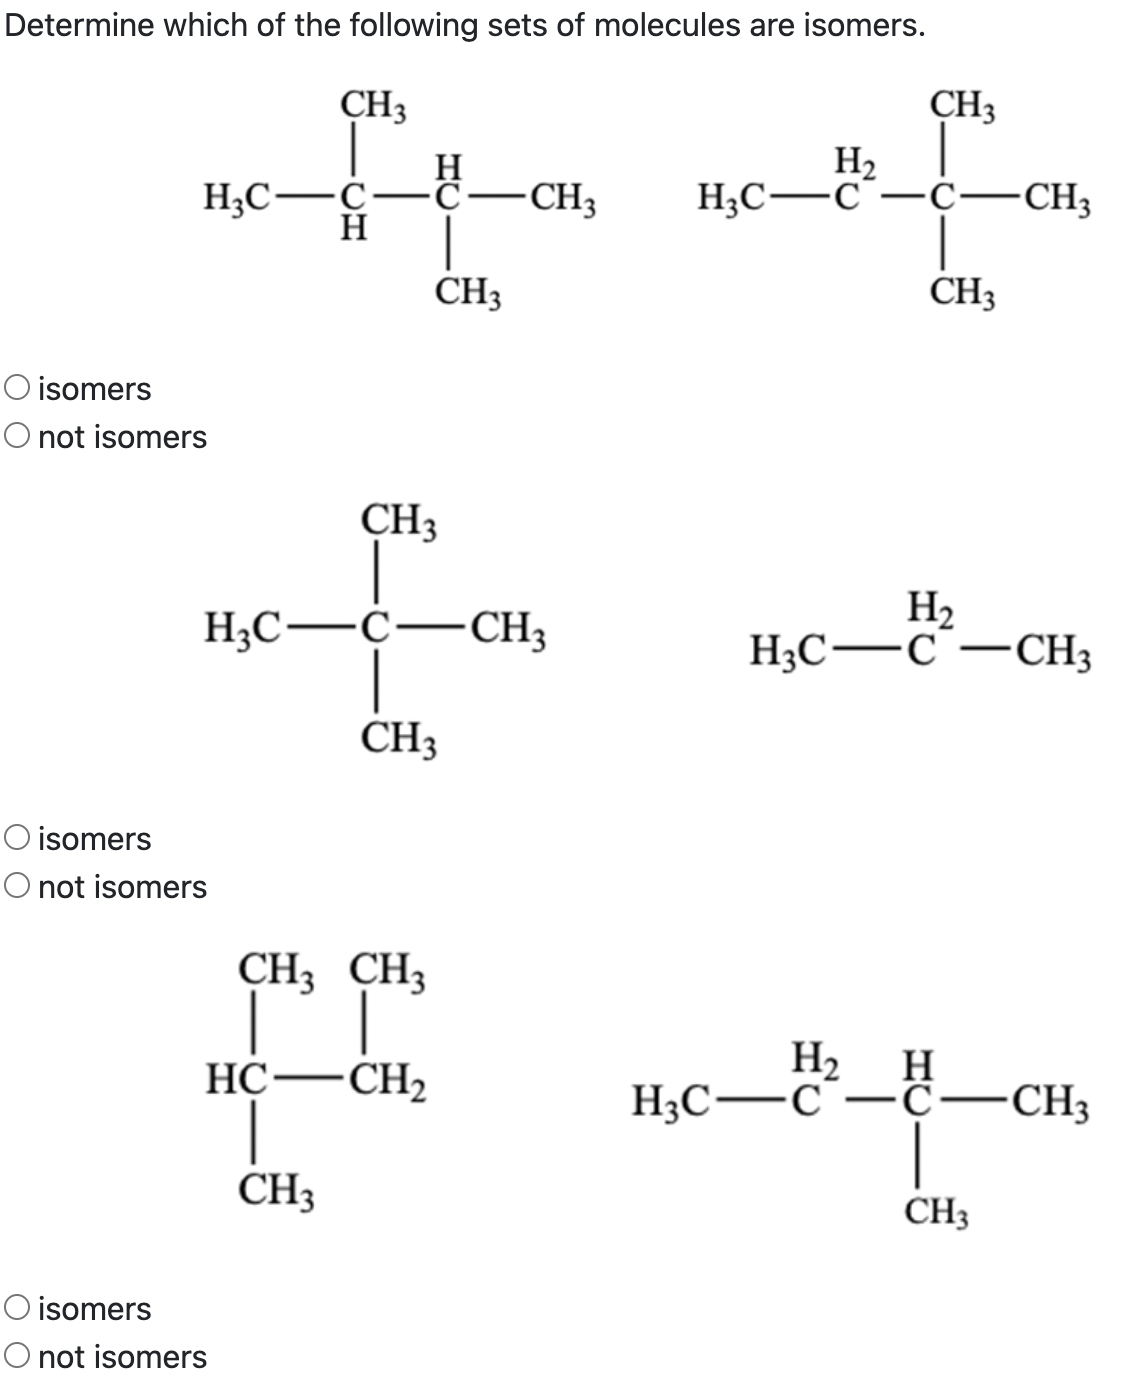 SOLVED: Determine which of the following sets of molecules are isomers ...